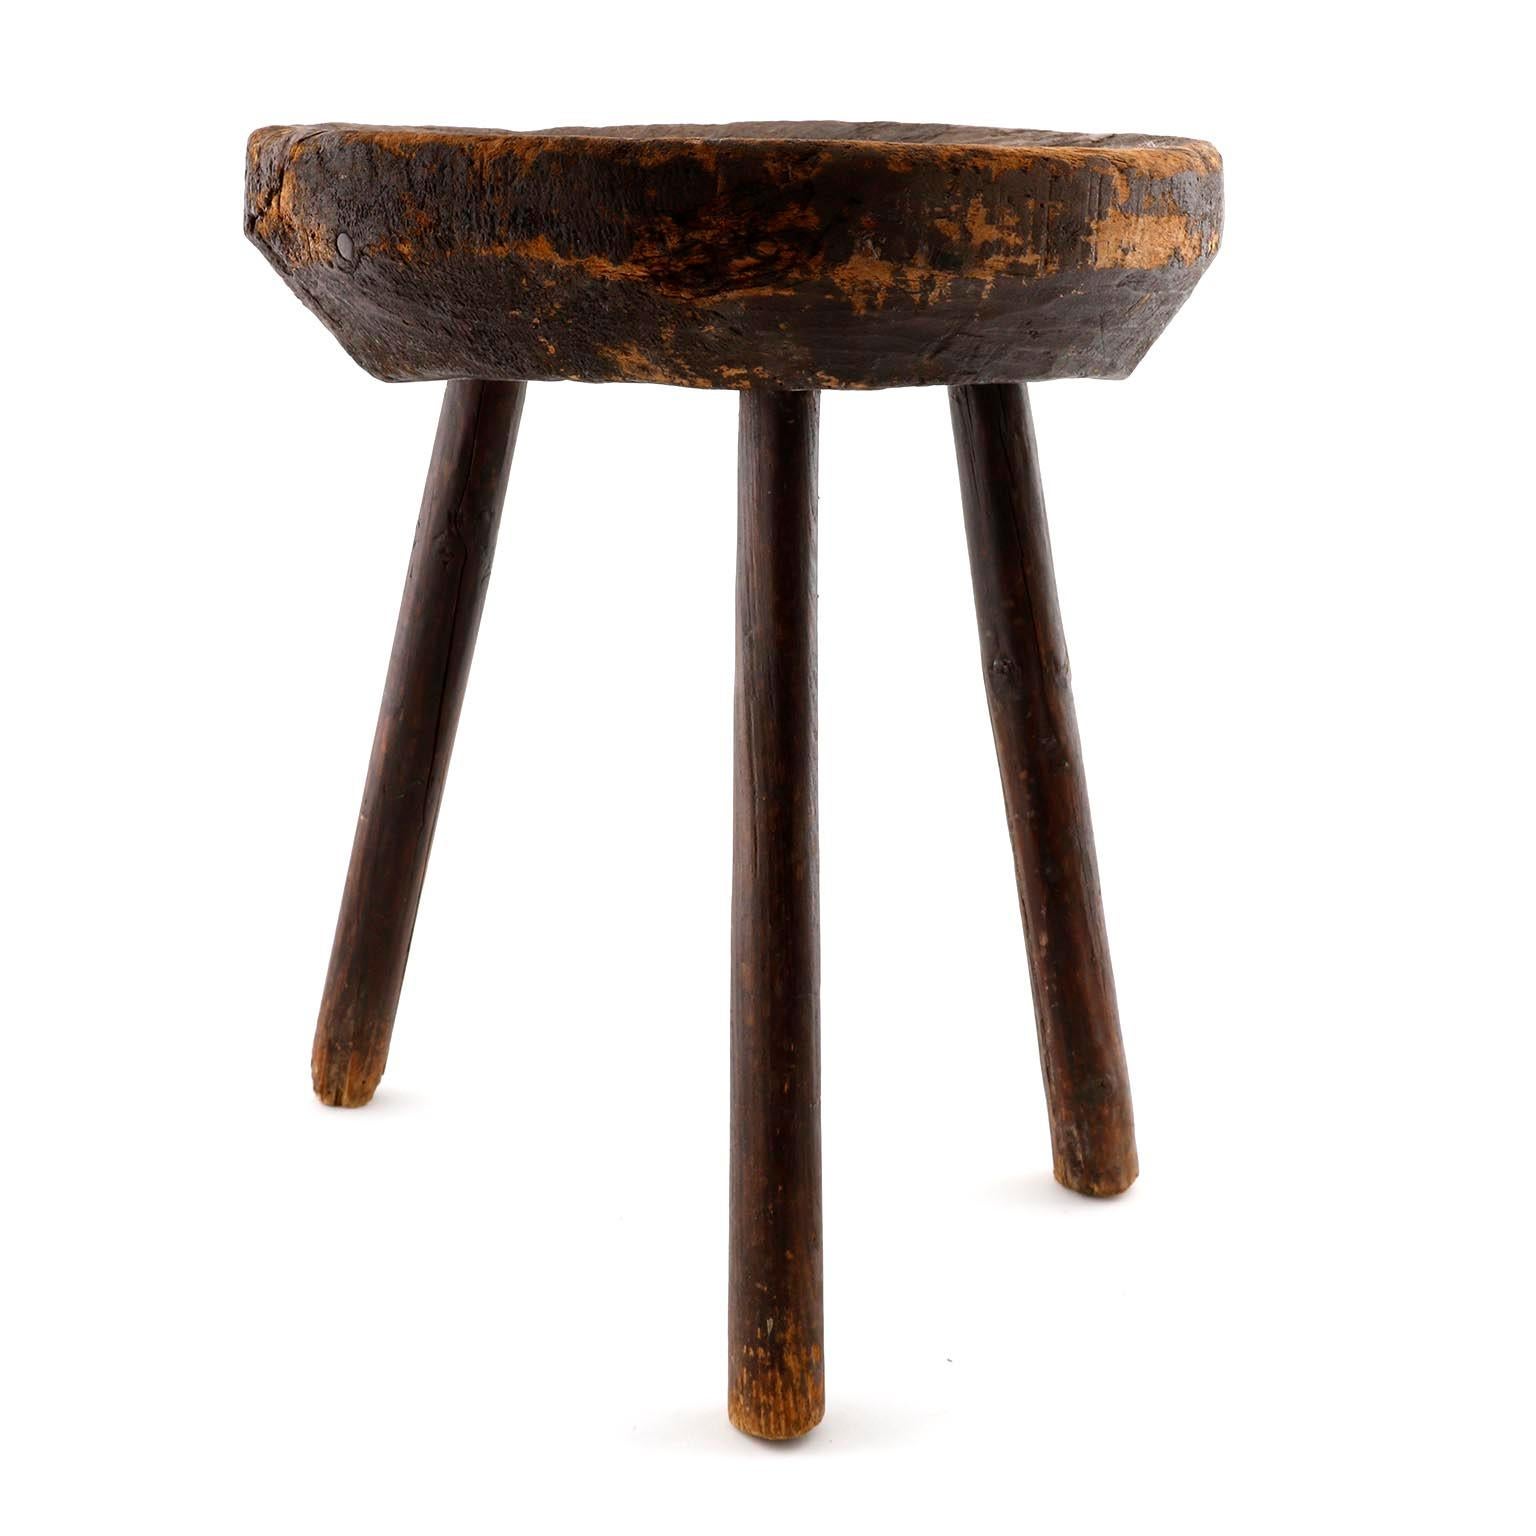 A vintage solid dark wood stool with great patina and three splayed legs.
On one side there is a carving which is probably a grip.
This stool is very likely an early European milking stool to milk cows.